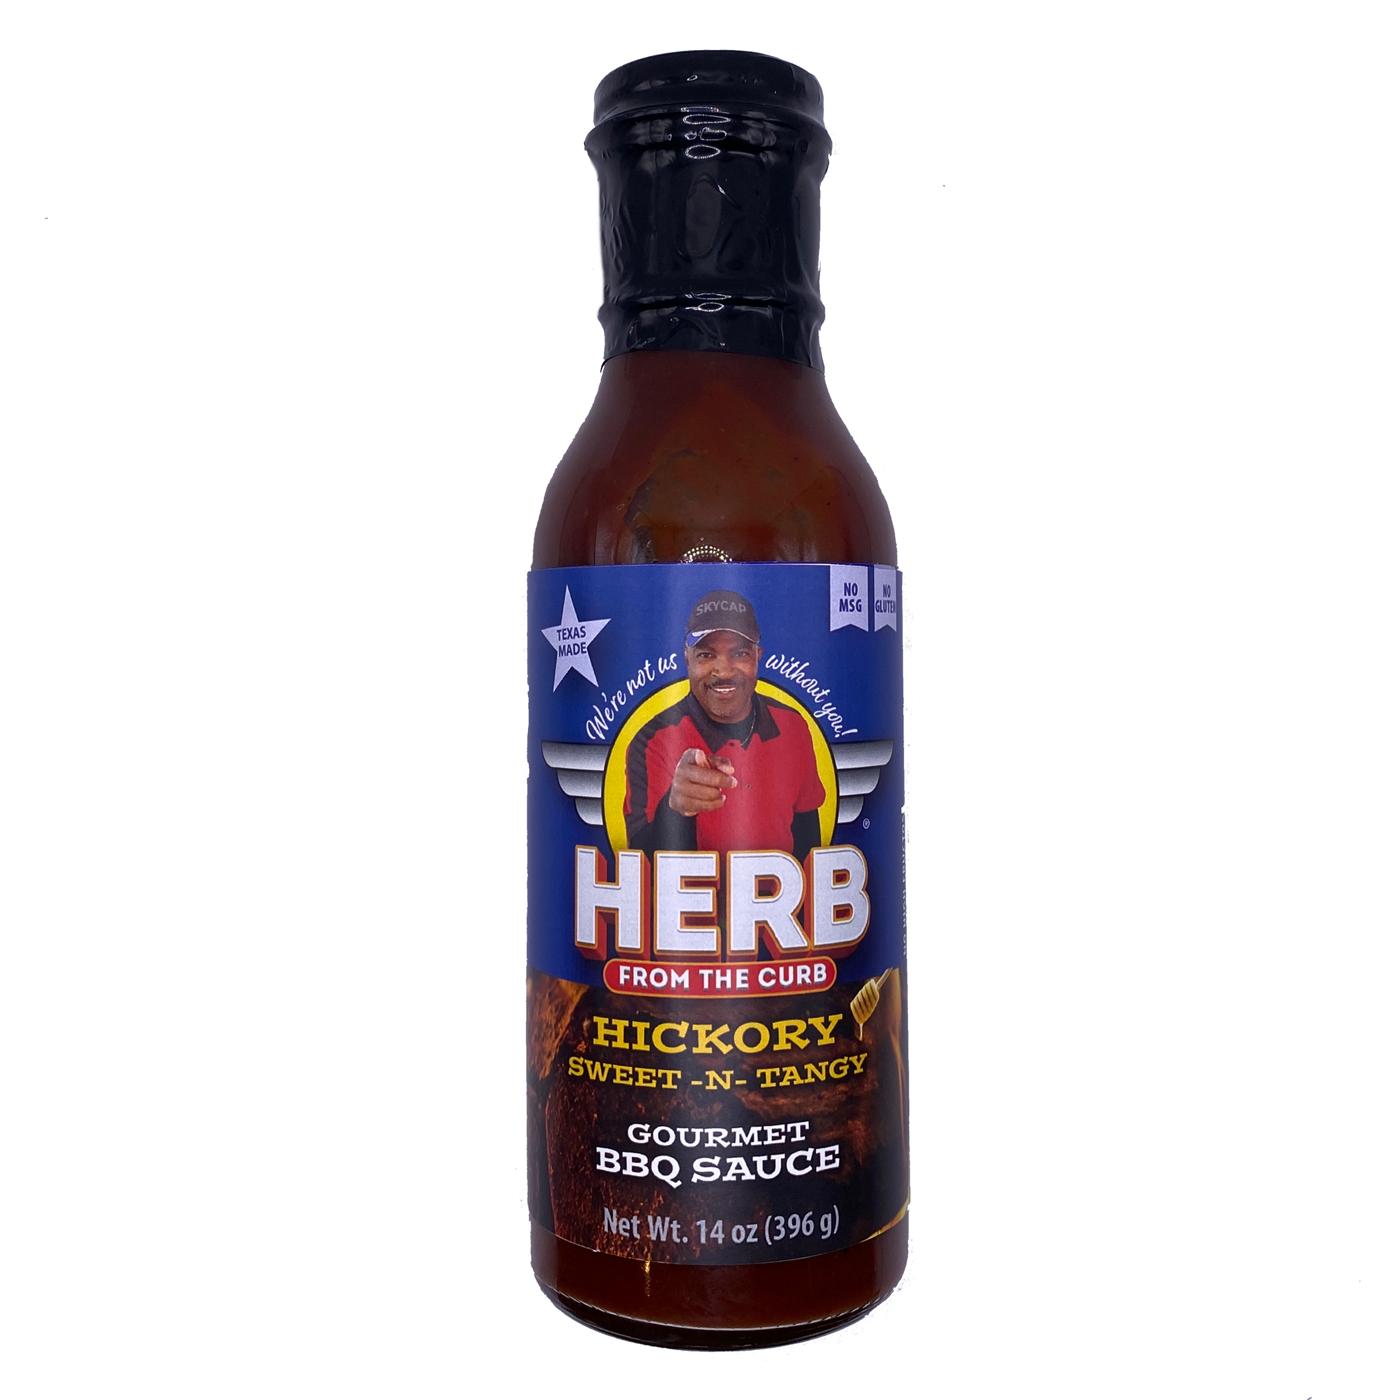 Herb From the Curb Sweet-N-Tangy Hickory Gourmet BBQ Sauce; image 1 of 2